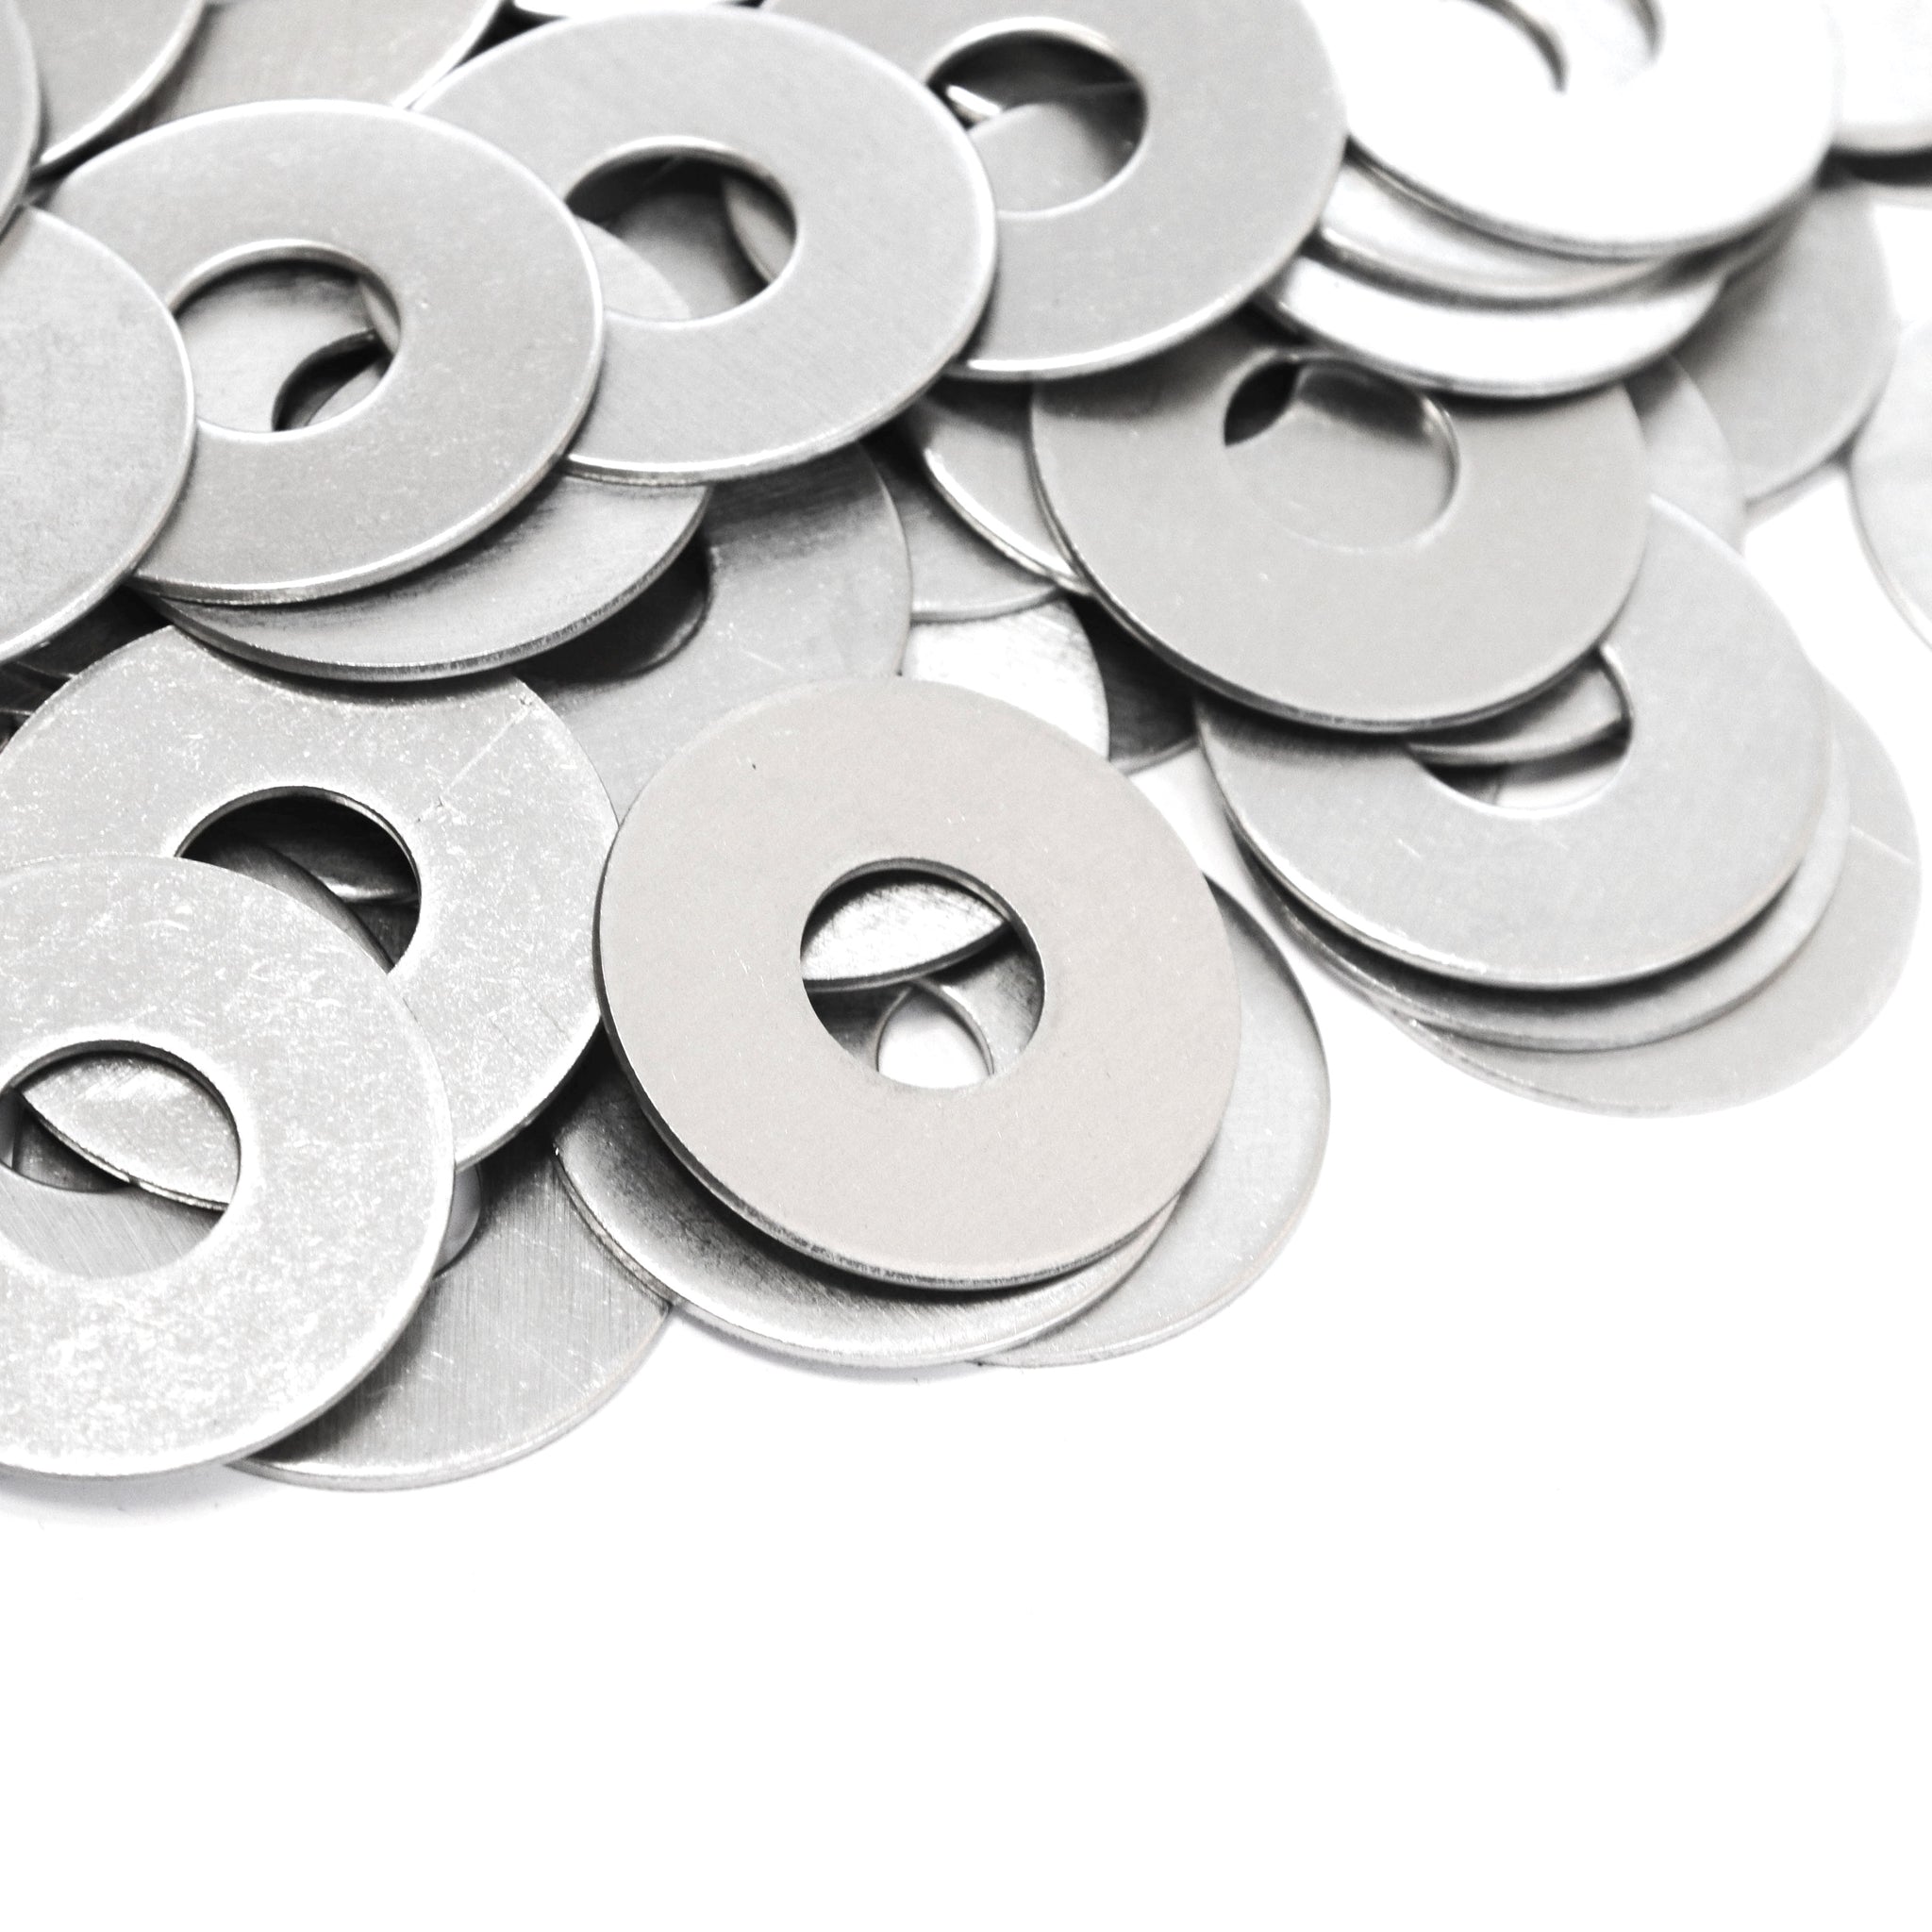 Red Hound Auto 100 Flat Fender Washers Set Fits 1/2" .531 Inch ID Hole Size, 1.5 Inch OD for 304 SS Stainless Steel Corrosion Resistant